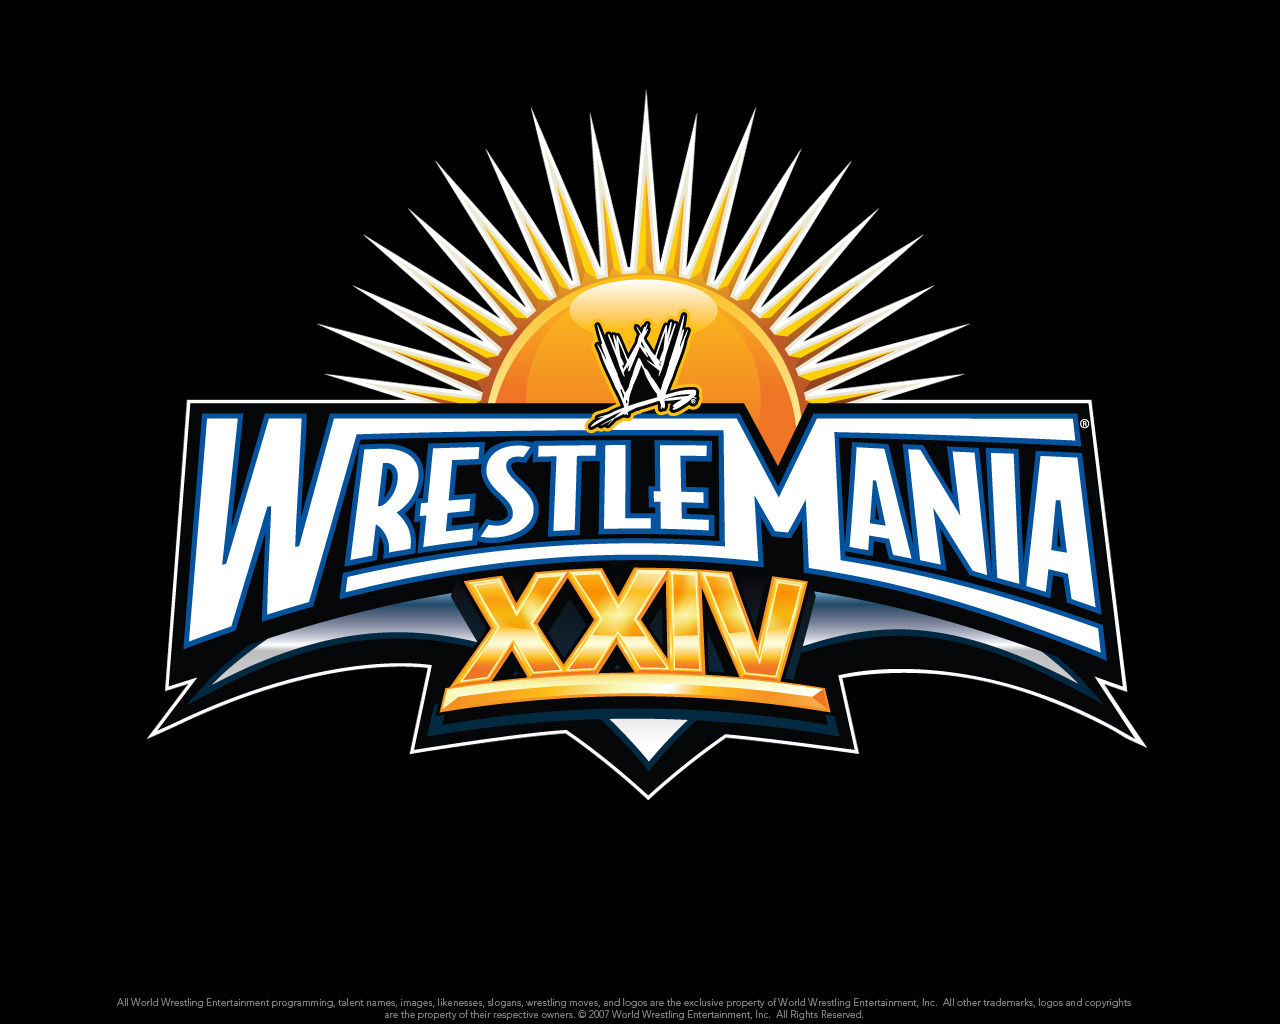 Wrestle Mania 24 wallpapers Wrestle Mania 24 pictures WWE